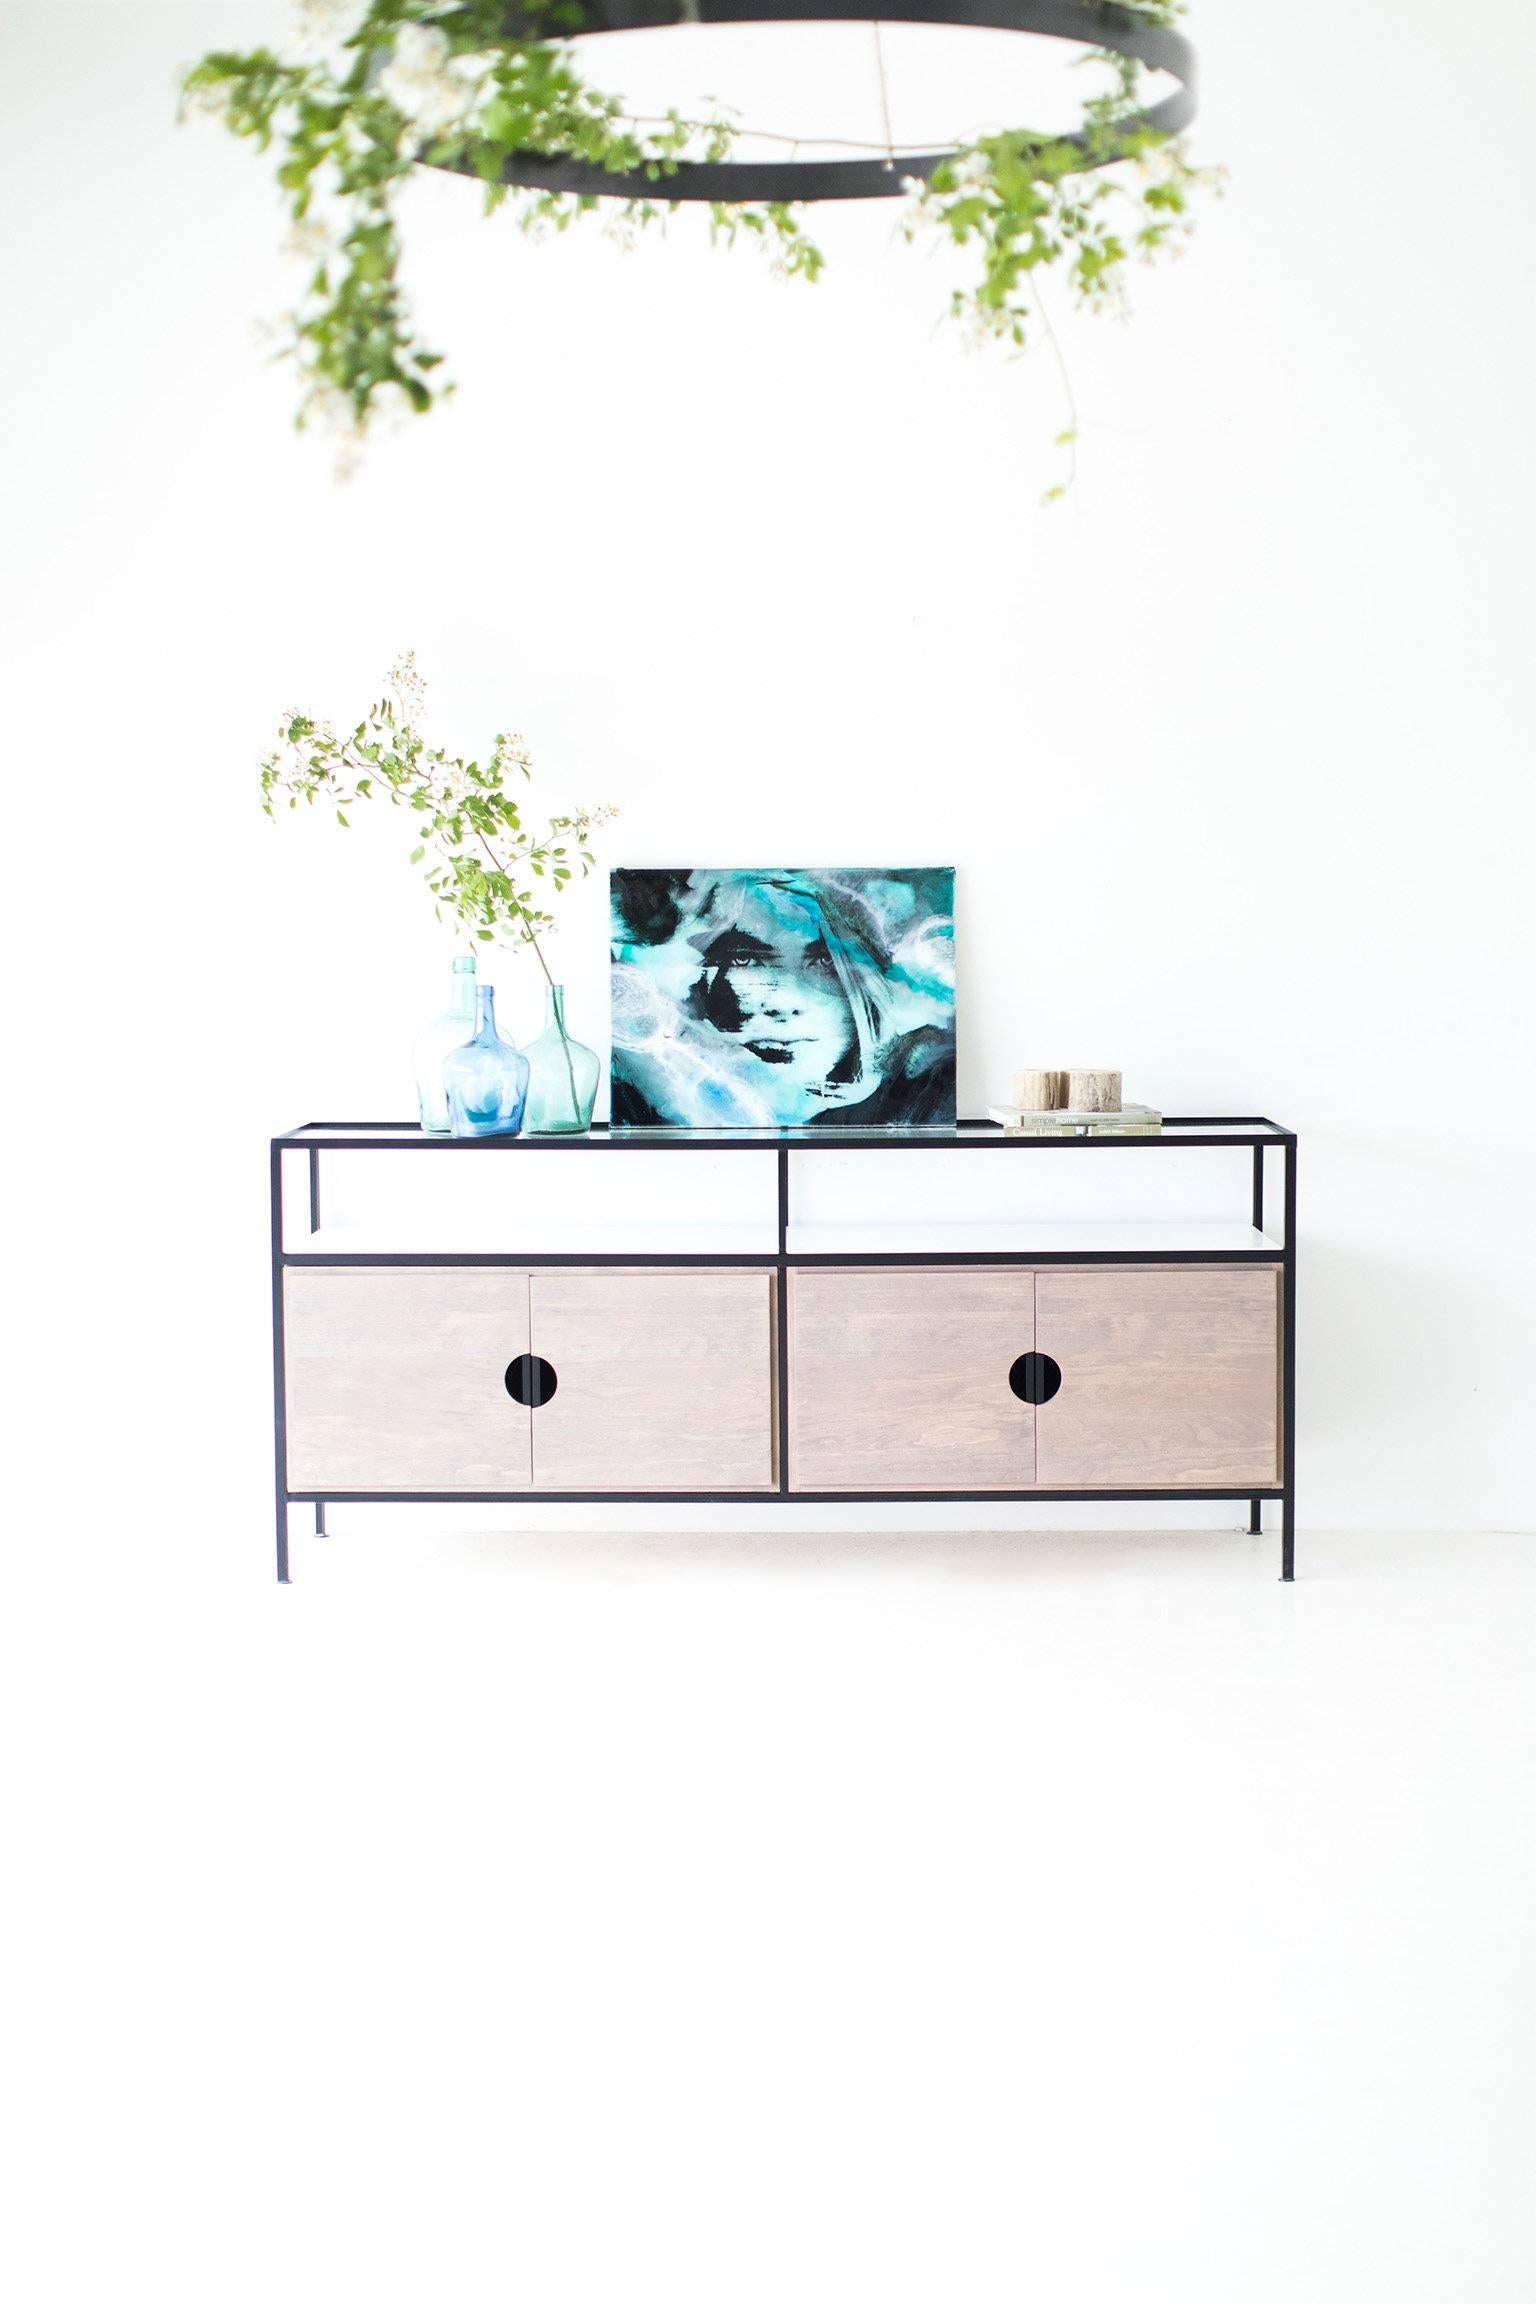 This Modern credenza is made in the heart of Ohio with locally sourced wood. Each unit is handmade with solid grey-washed pine OR black walnut and finished with a beautiful matte finish. The frame is hand welded steel and powder coated in matte